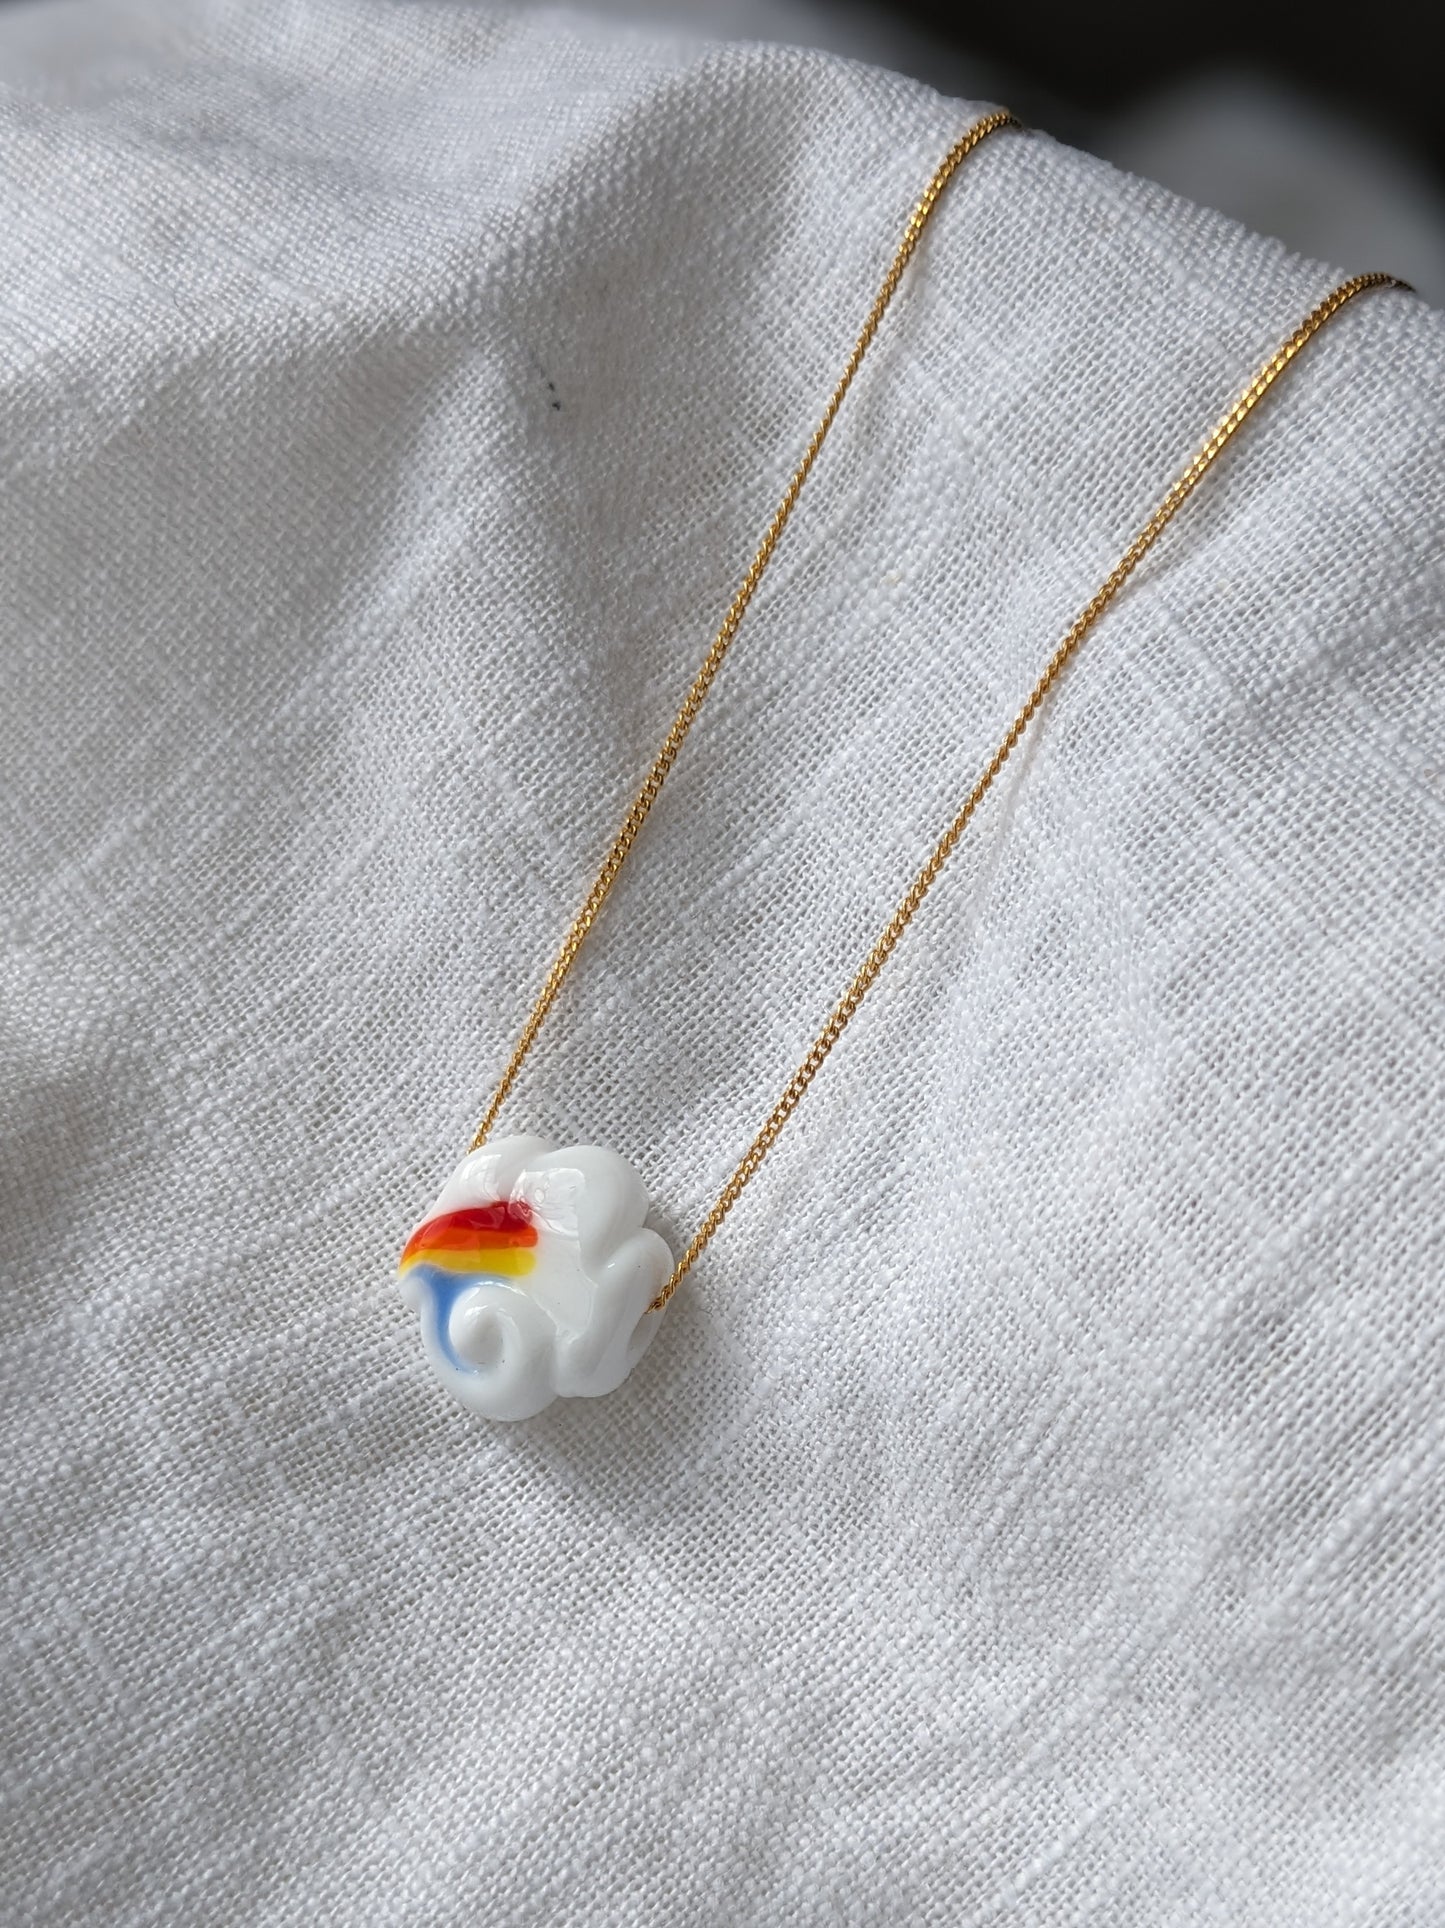 Another World Belfast Rainbow Cloud Collab necklace